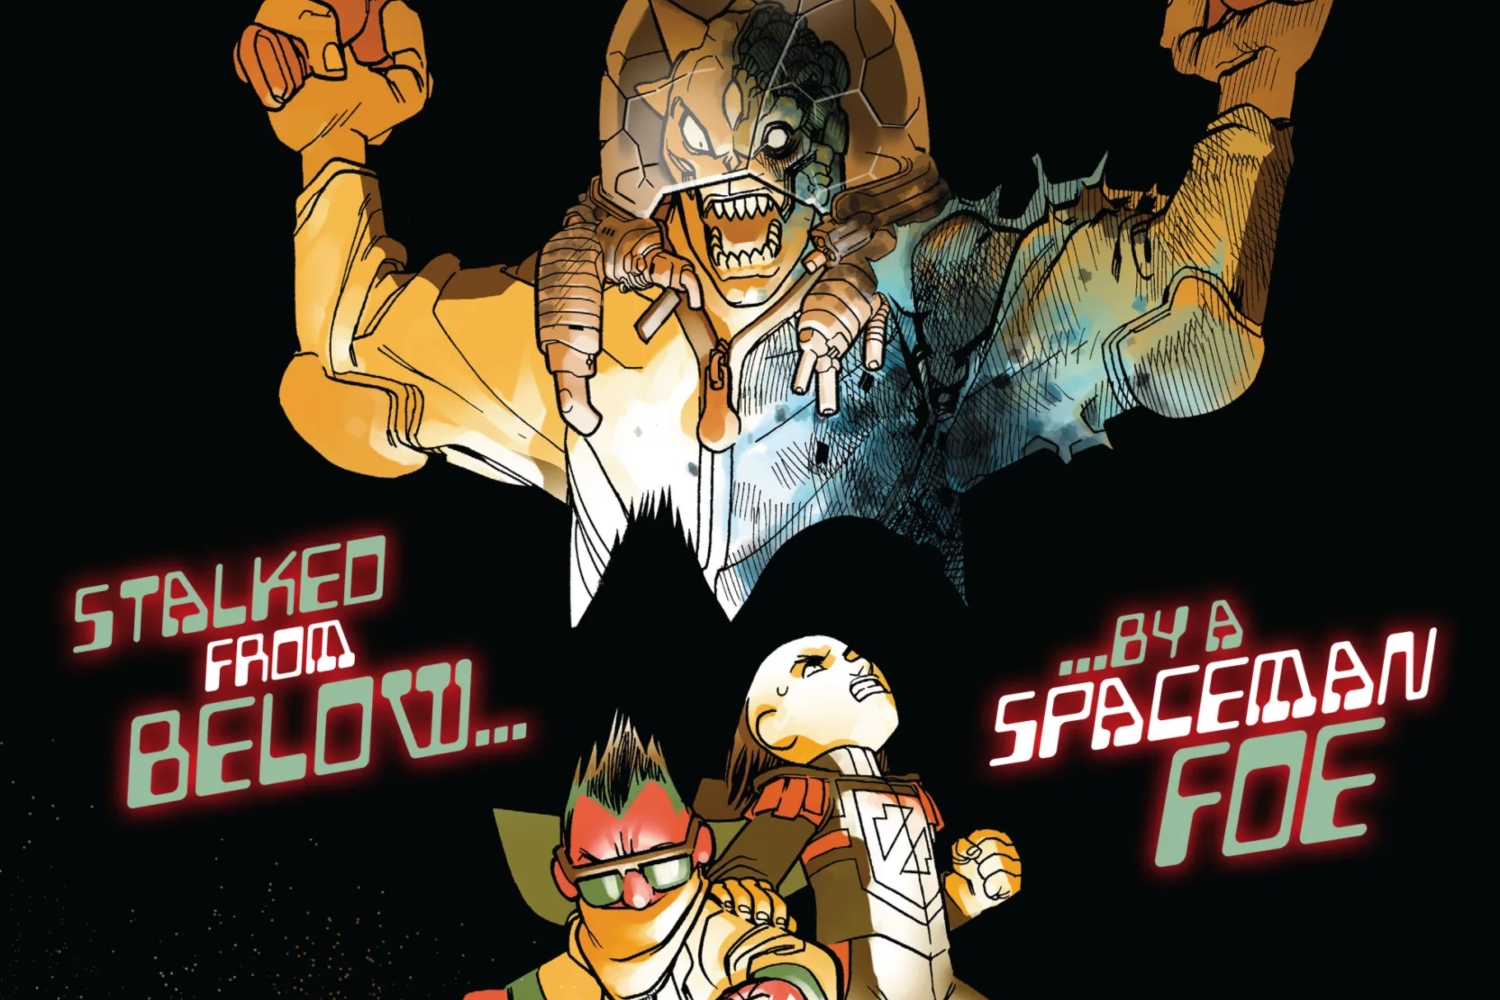 'Sinister Sons' #3 needed fewer space whales and more quality time